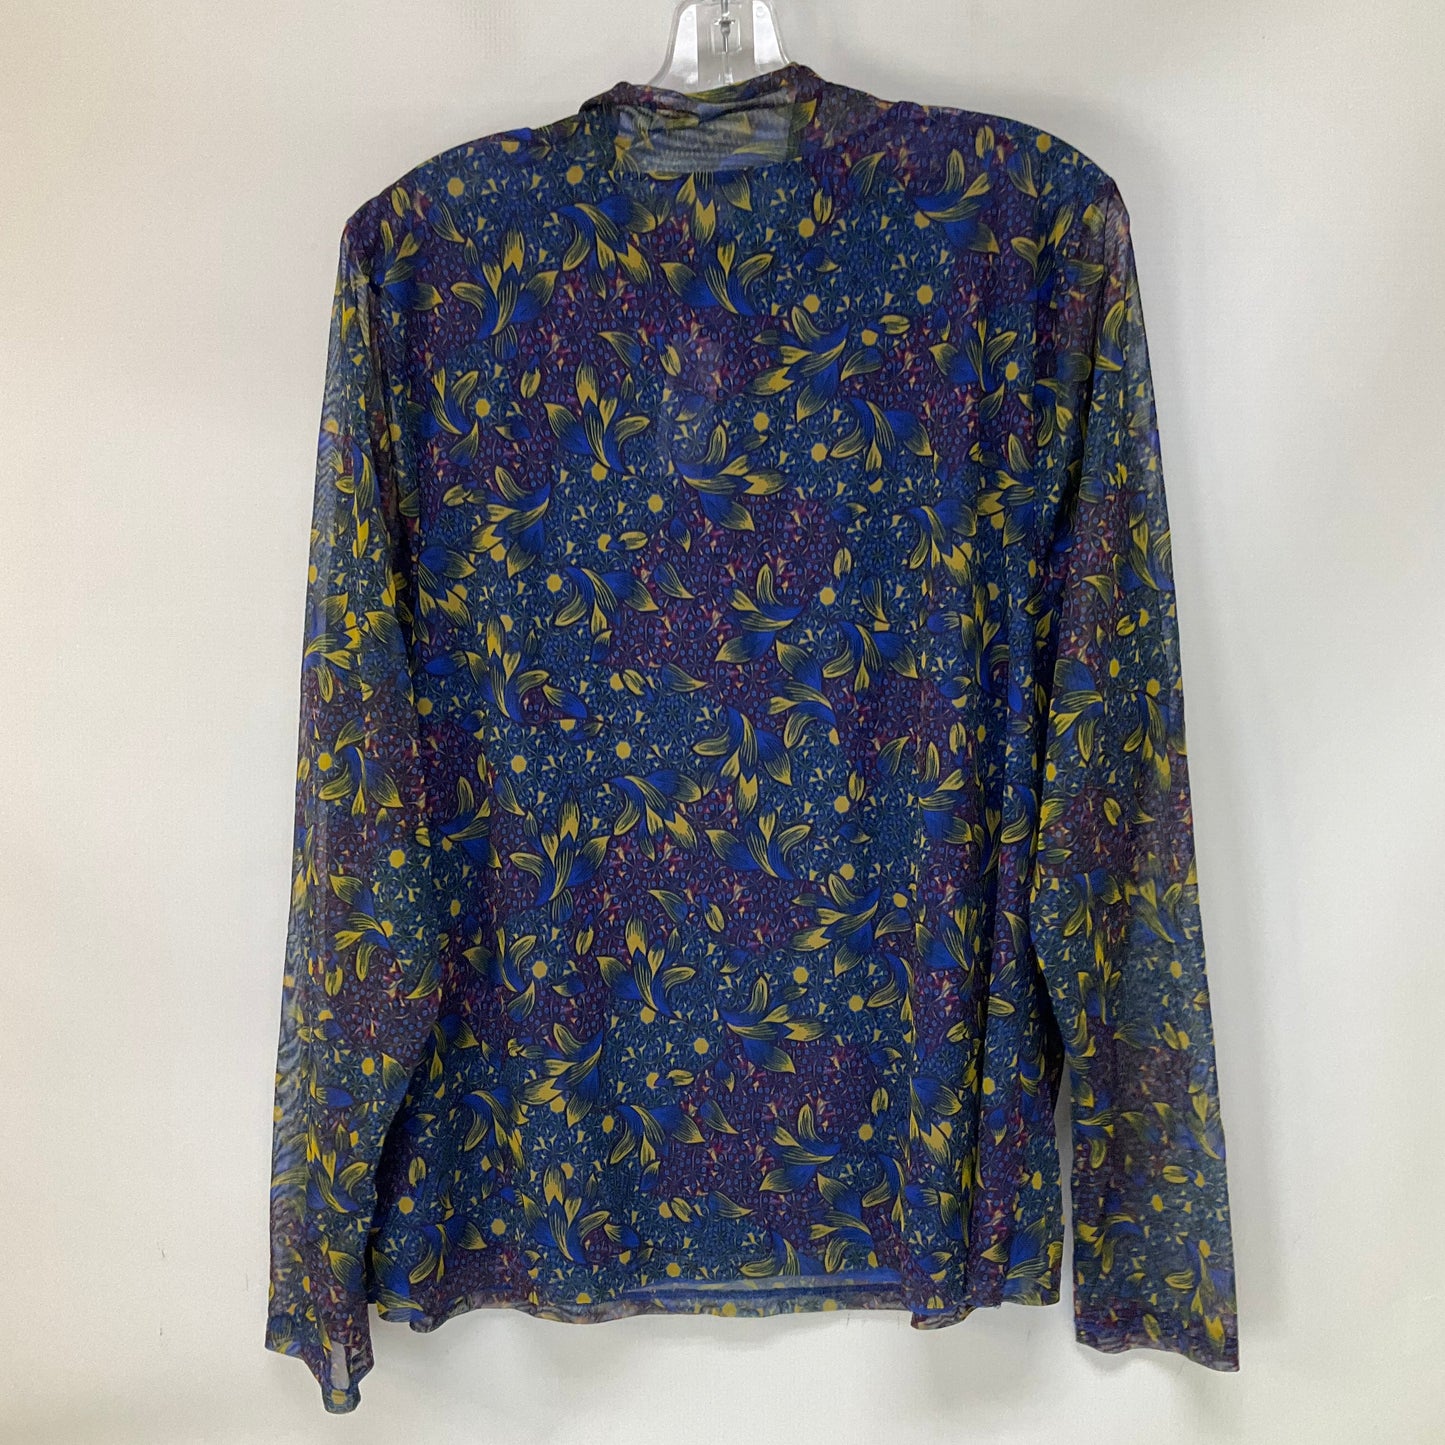 Blue Top Long Sleeve Anthropologie, Size 2x